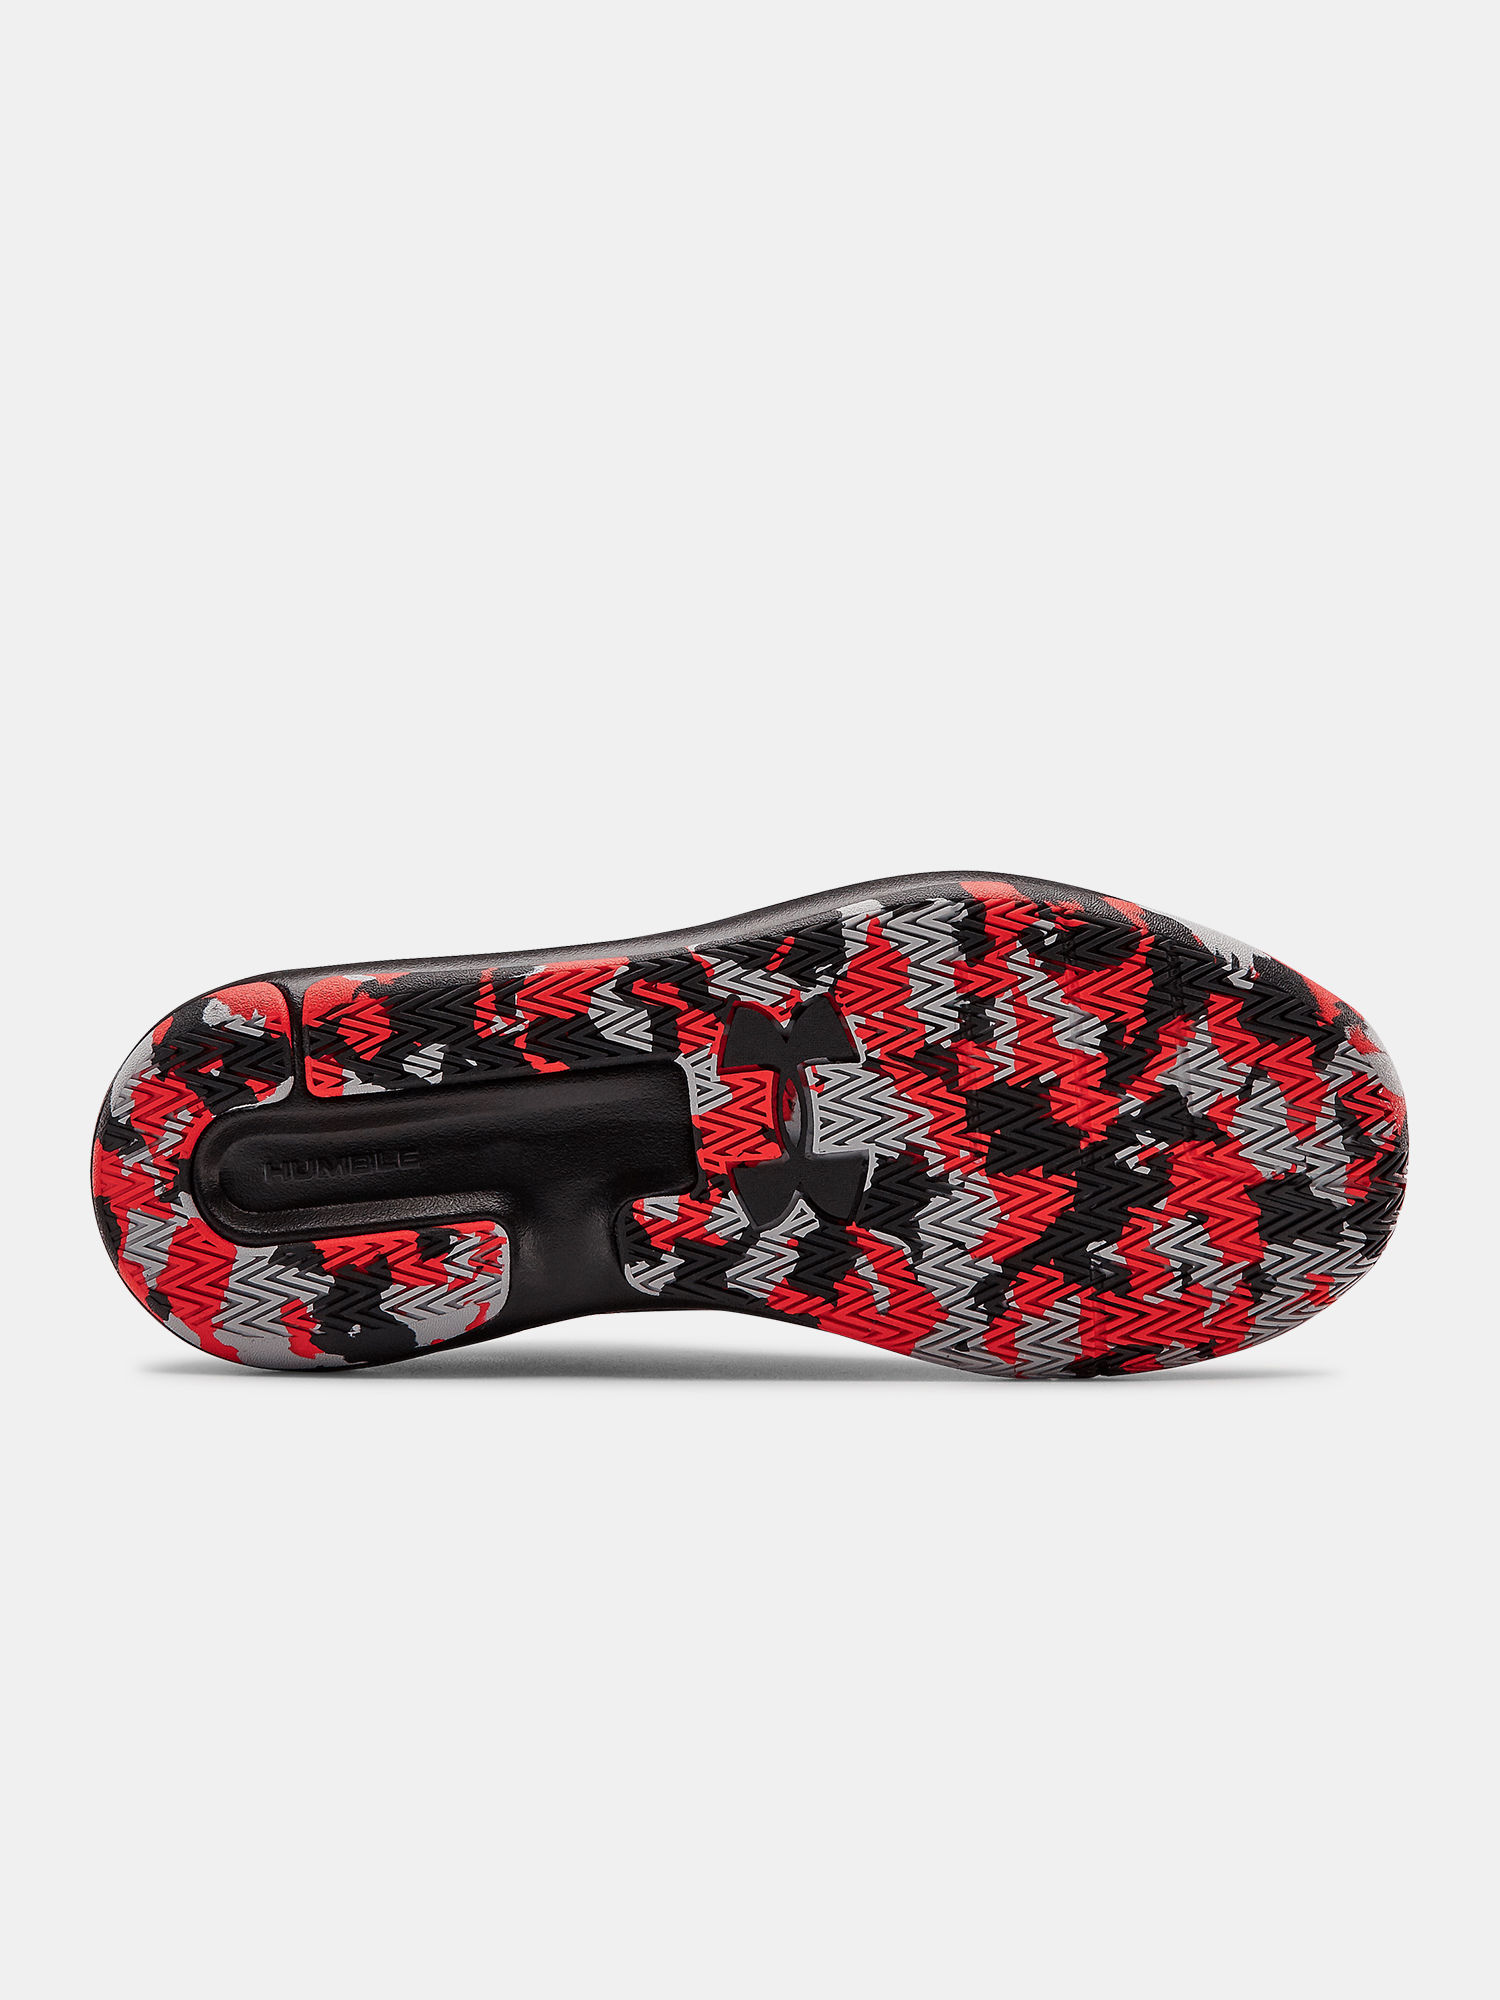 Boty Under Armour Lockdown 5-RED (4)